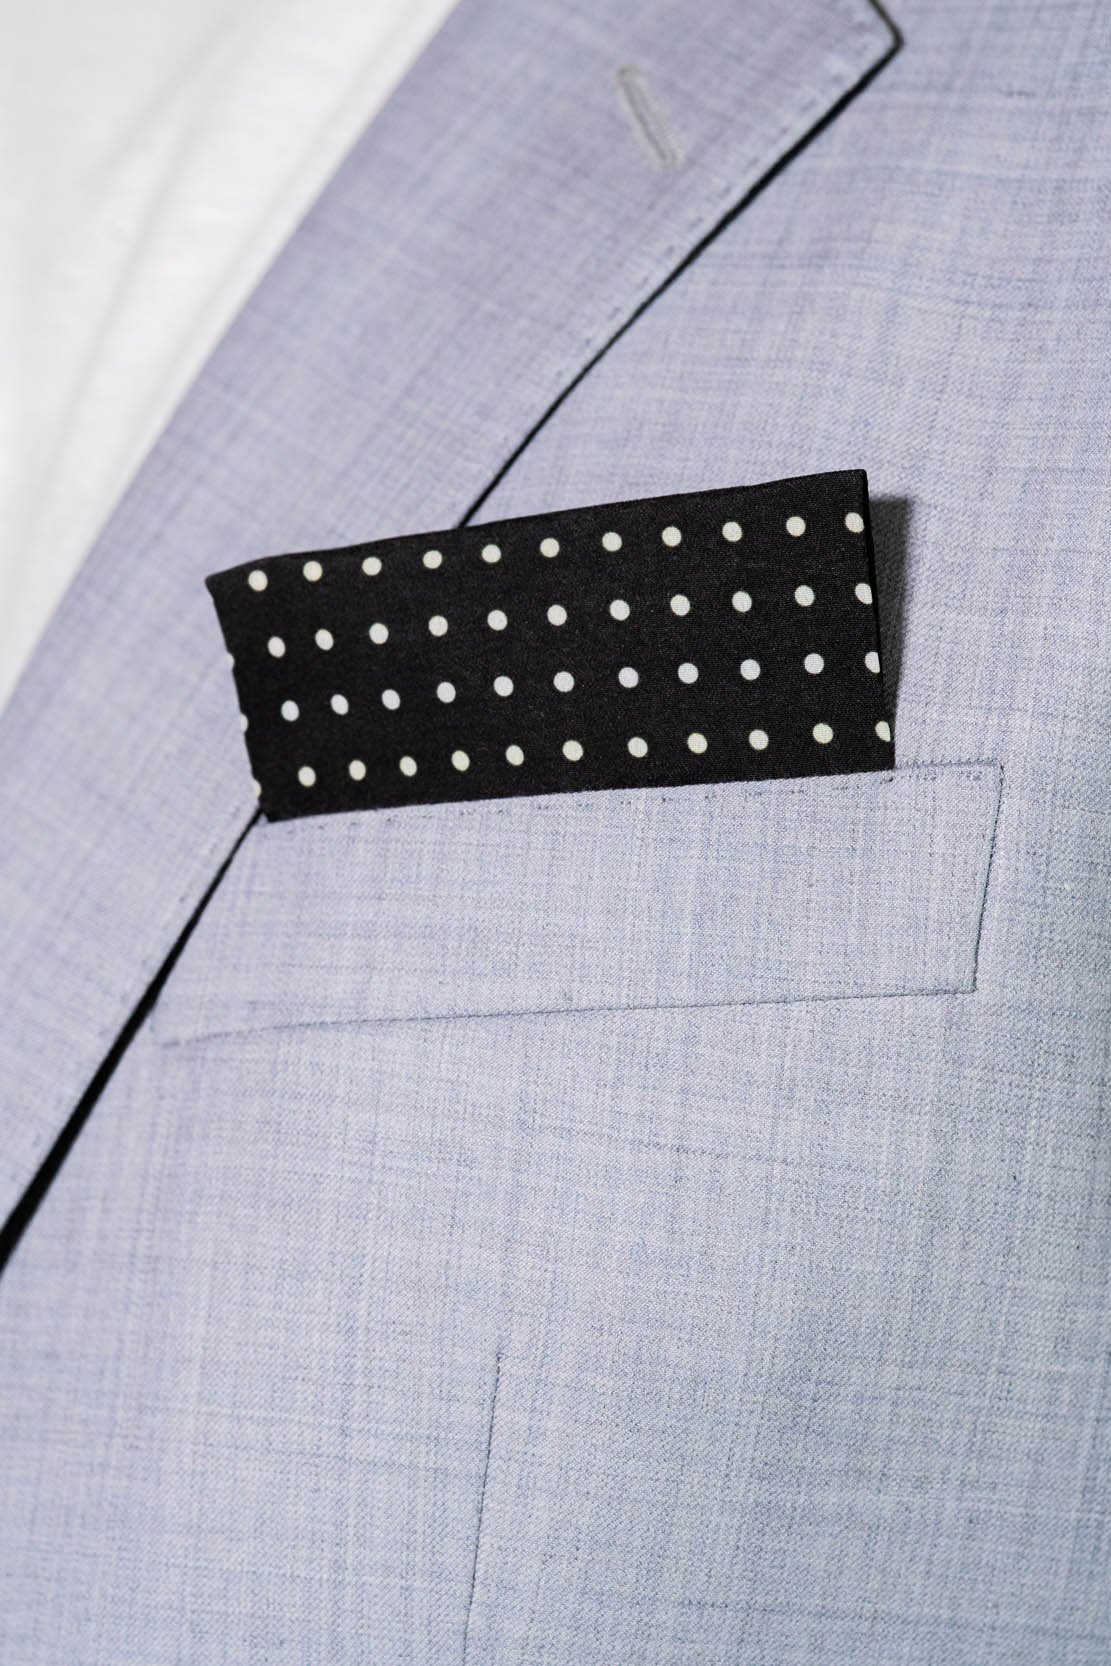 RARE CUT's Onyx Dots Pocket Square Worn in a Suit Jacket